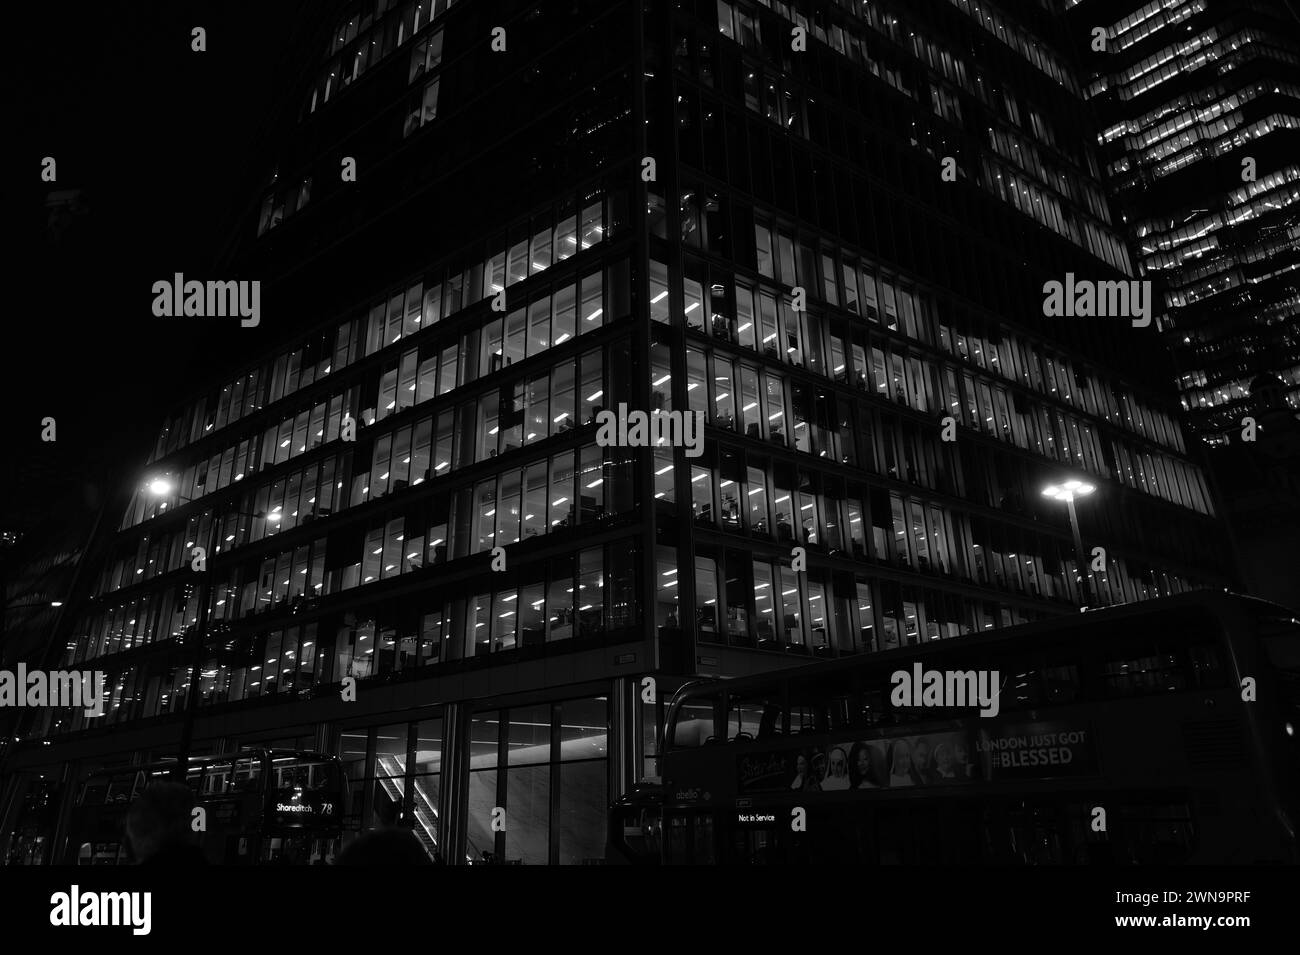 Powerful abstract monochrome architectural landscape of sky-scraper offices illuminated at night on Bishopsgate near Liverpool Street in the City of London. Stock Photo